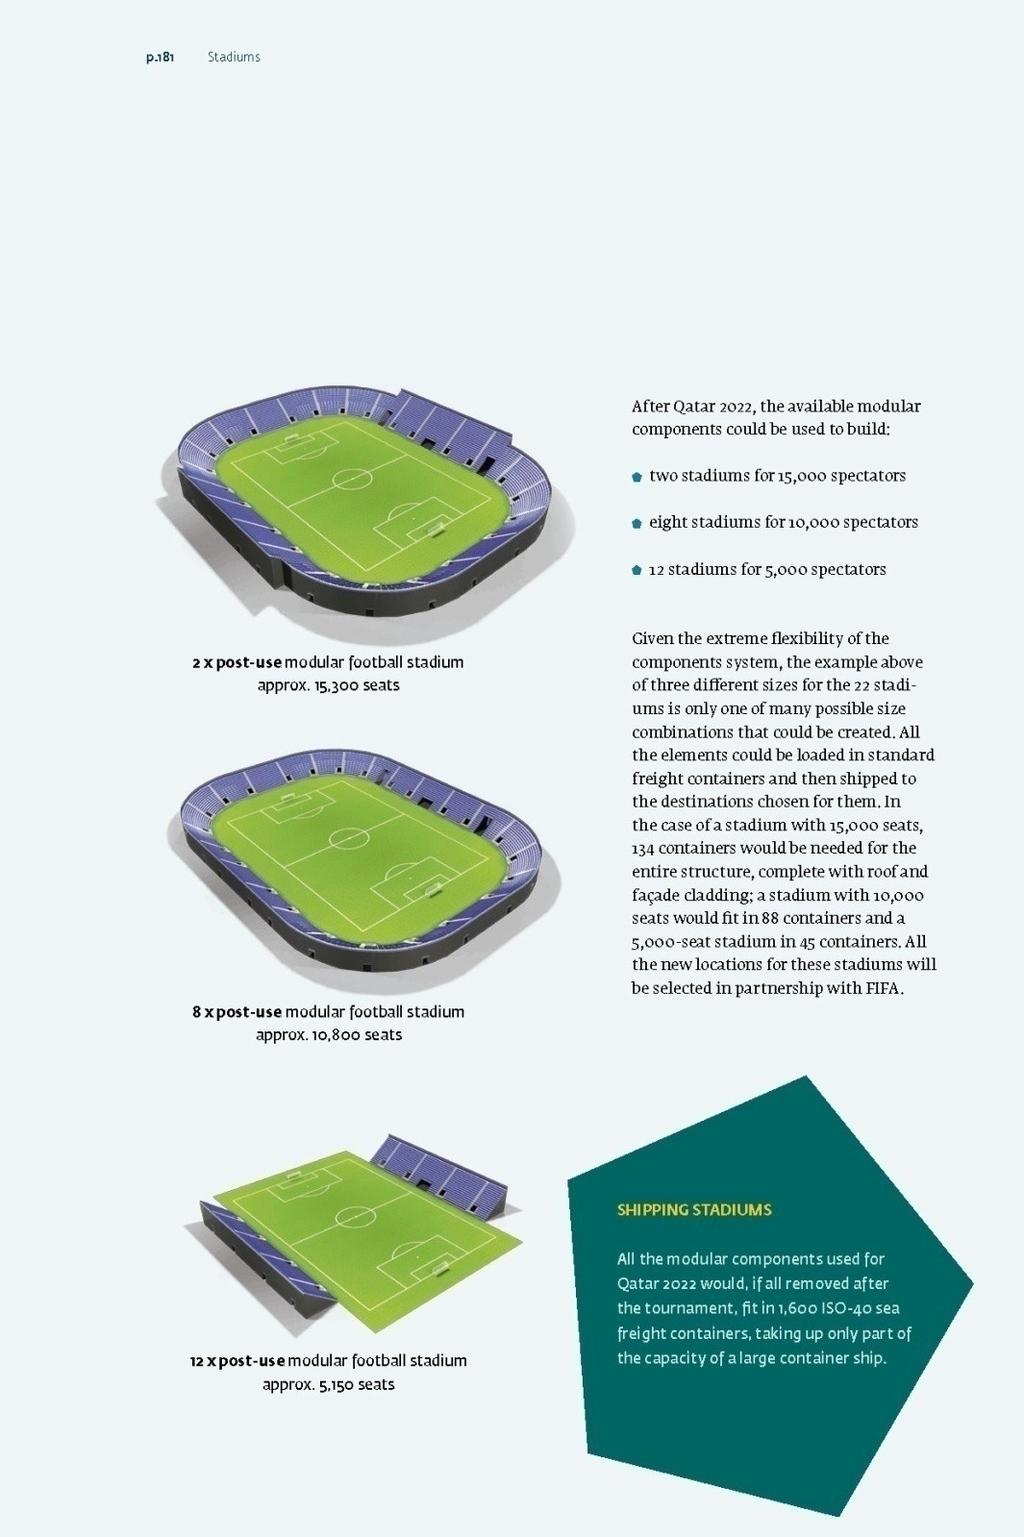 Stadium design for Qatar 2022 adaptable Concept for subsequent use banks on modularity.